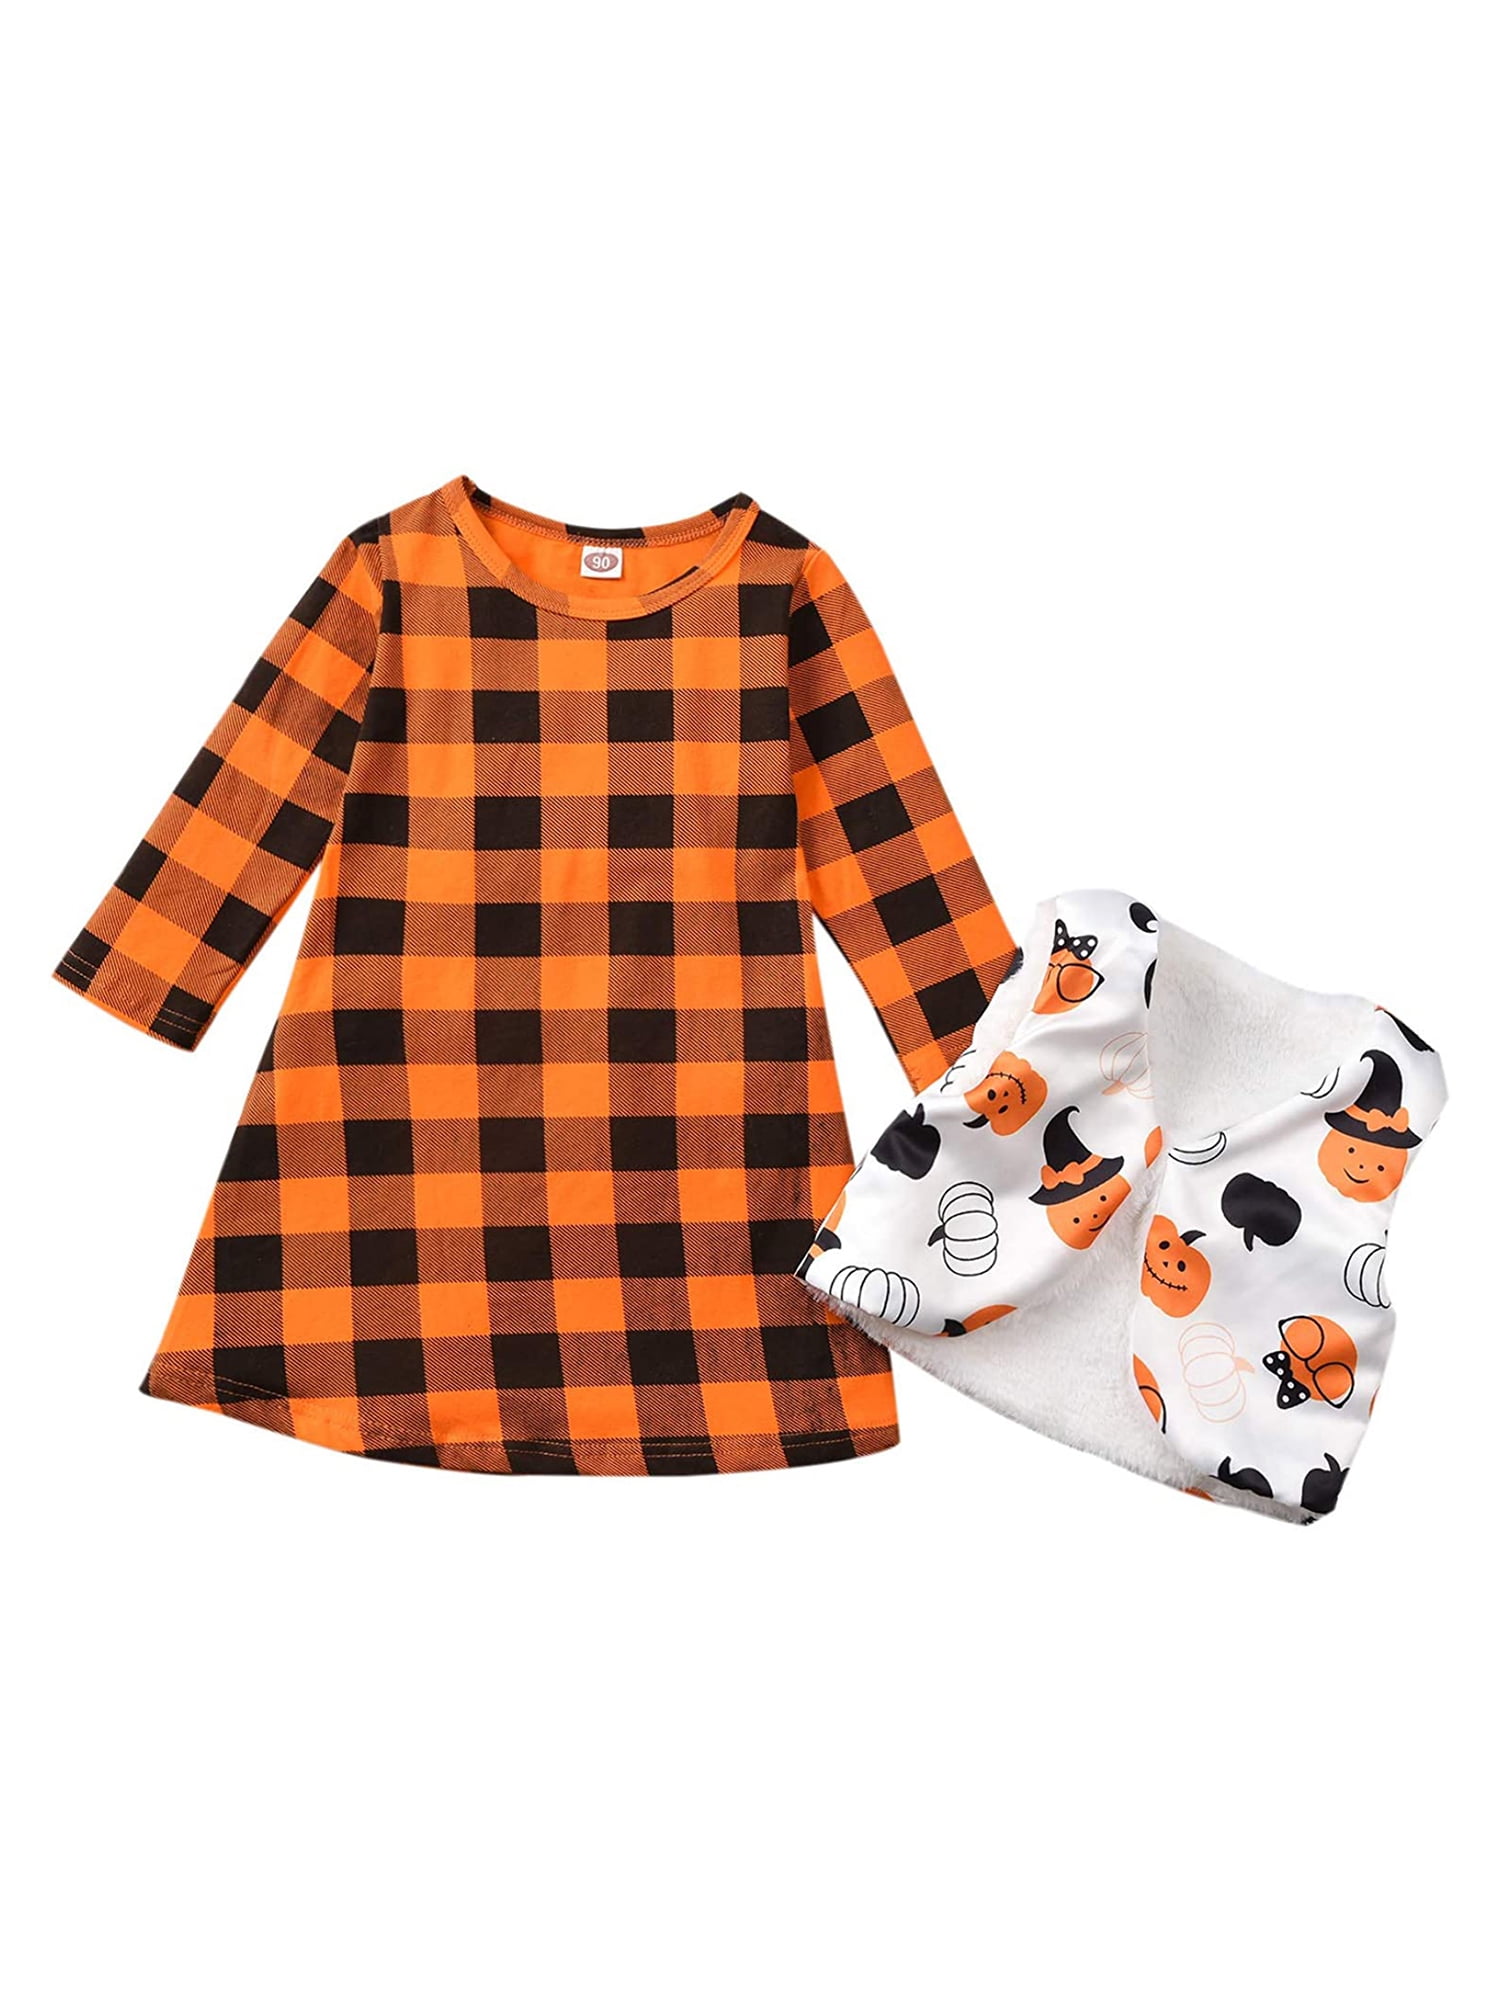 fioukiay Toddler Girls Halloween Outfits 2PC Kids Orange Plaid Dress with Reversible Vest Clothes Set 